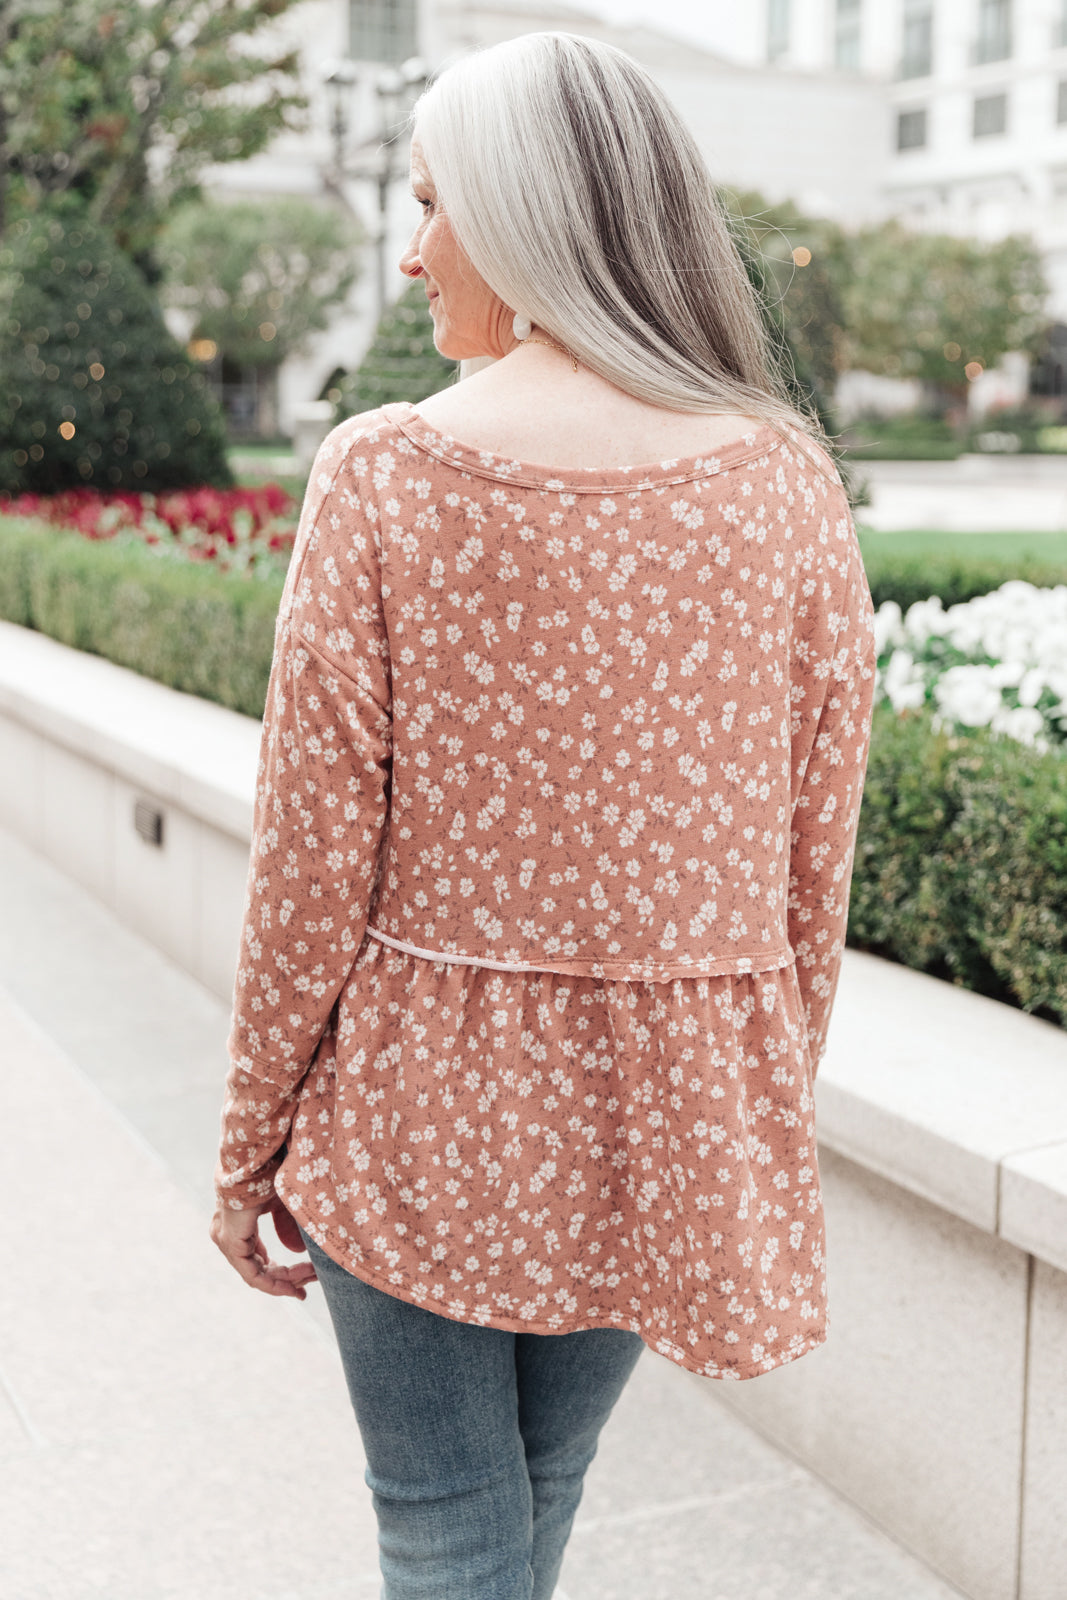 All About Flowers Top In Ginger